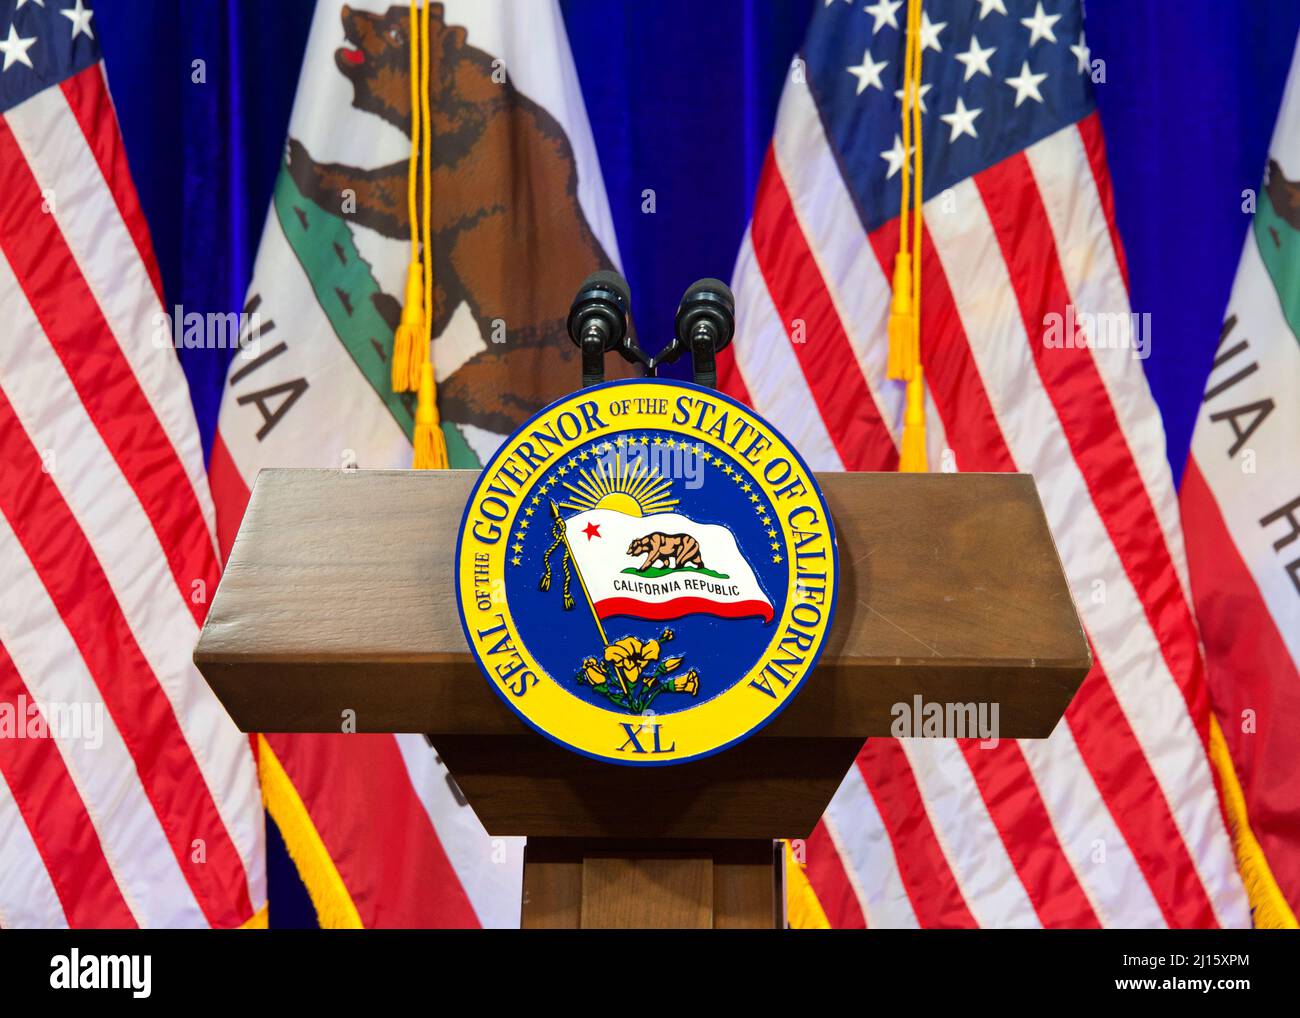 Sacramento, CA - March 8, 2022: Seal of the Governor of the State of California on a wood podium with American and California flags alternating behind Stock Photo